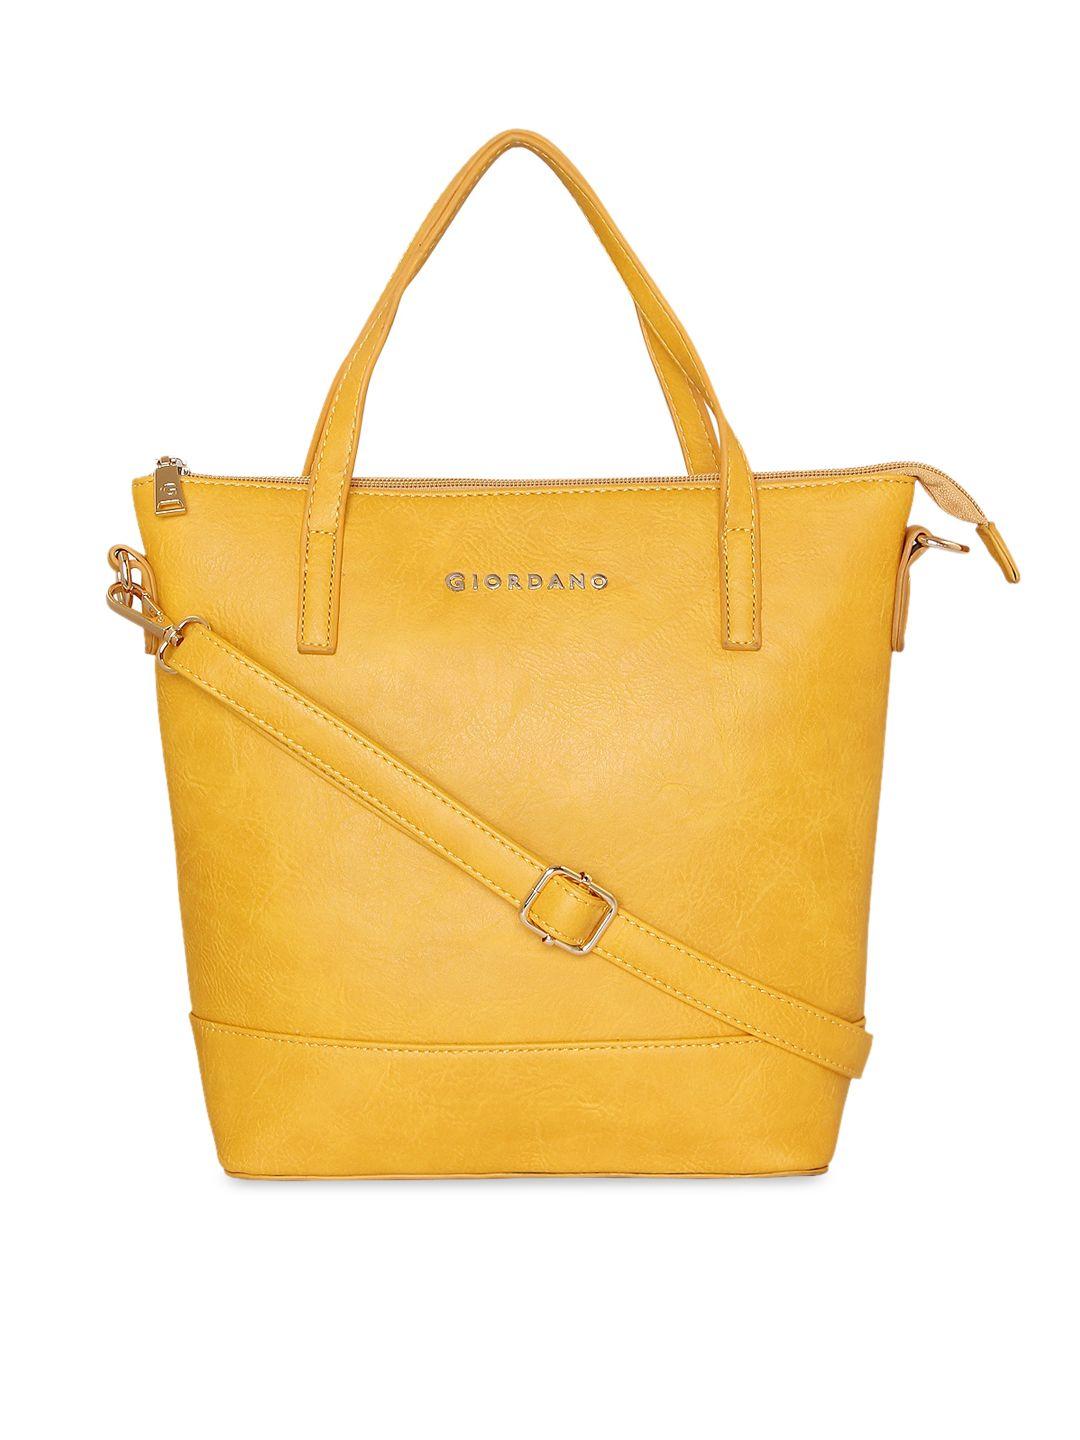 giordano yellow solid tote bag